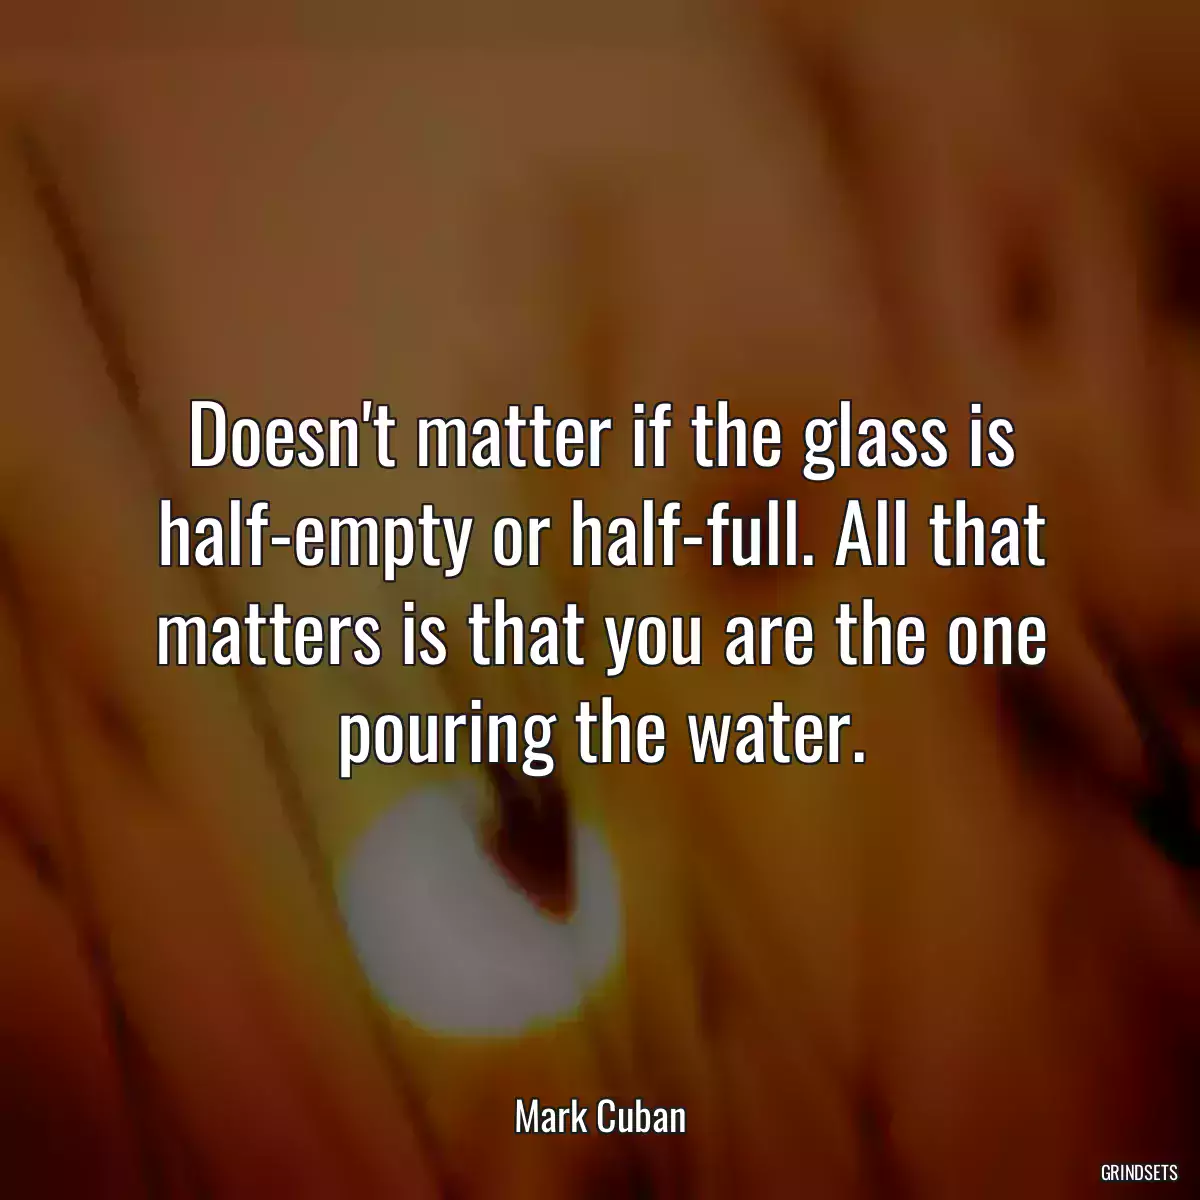 Doesn\'t matter if the glass is half-empty or half-full. All that matters is that you are the one pouring the water.